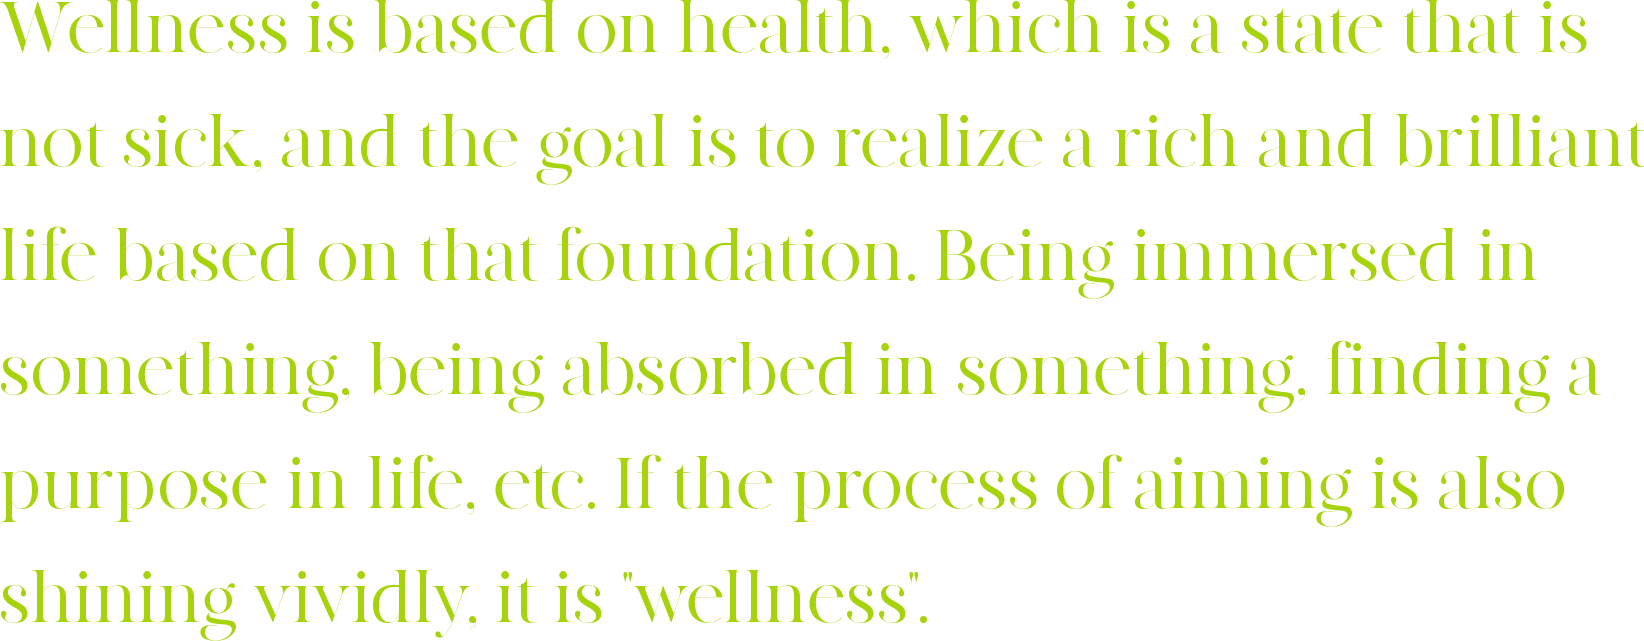 Wellness is based on health, which is a state that is not sick, and the goal is to realize a rich and brilliant life based on that foundation. Being immersed in something, being absorbed in something, finding a purpose in life, etc. If the process of aiming is also shining vividly, it is 'wellness'.